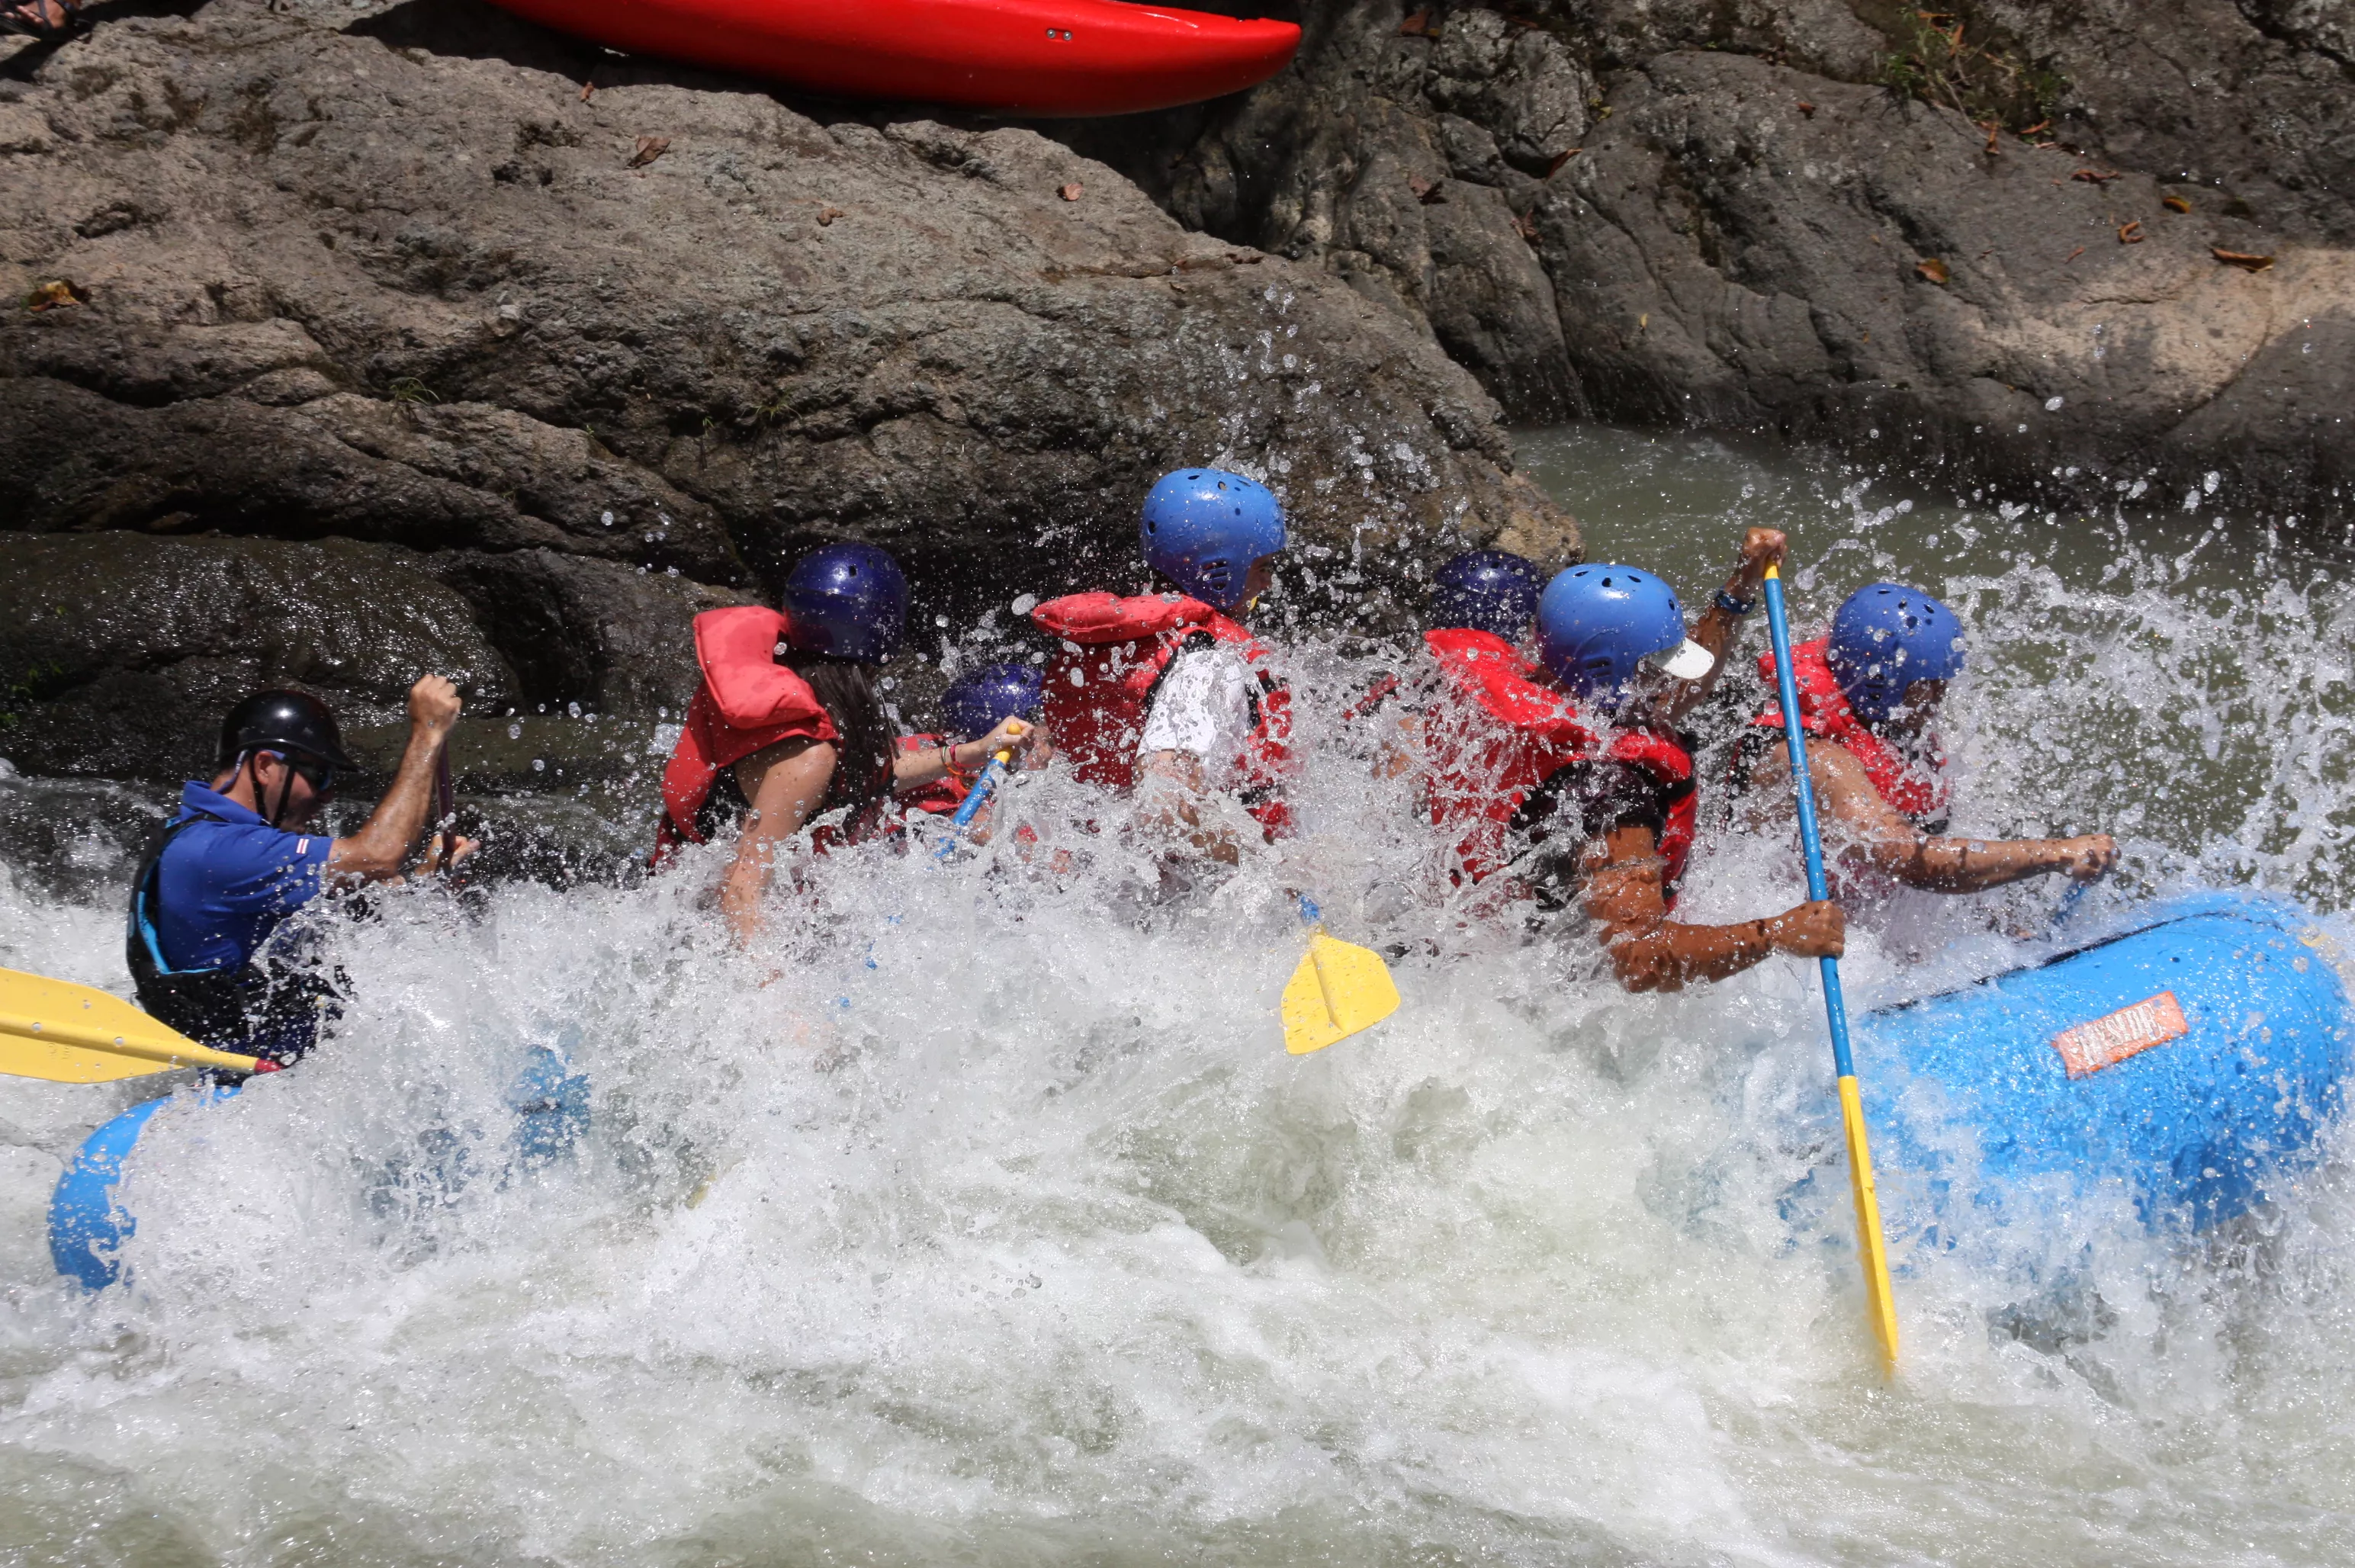 Rio Pacuare White Water Rafting in Costa Rica, North America | Rafting - Rated 1.1